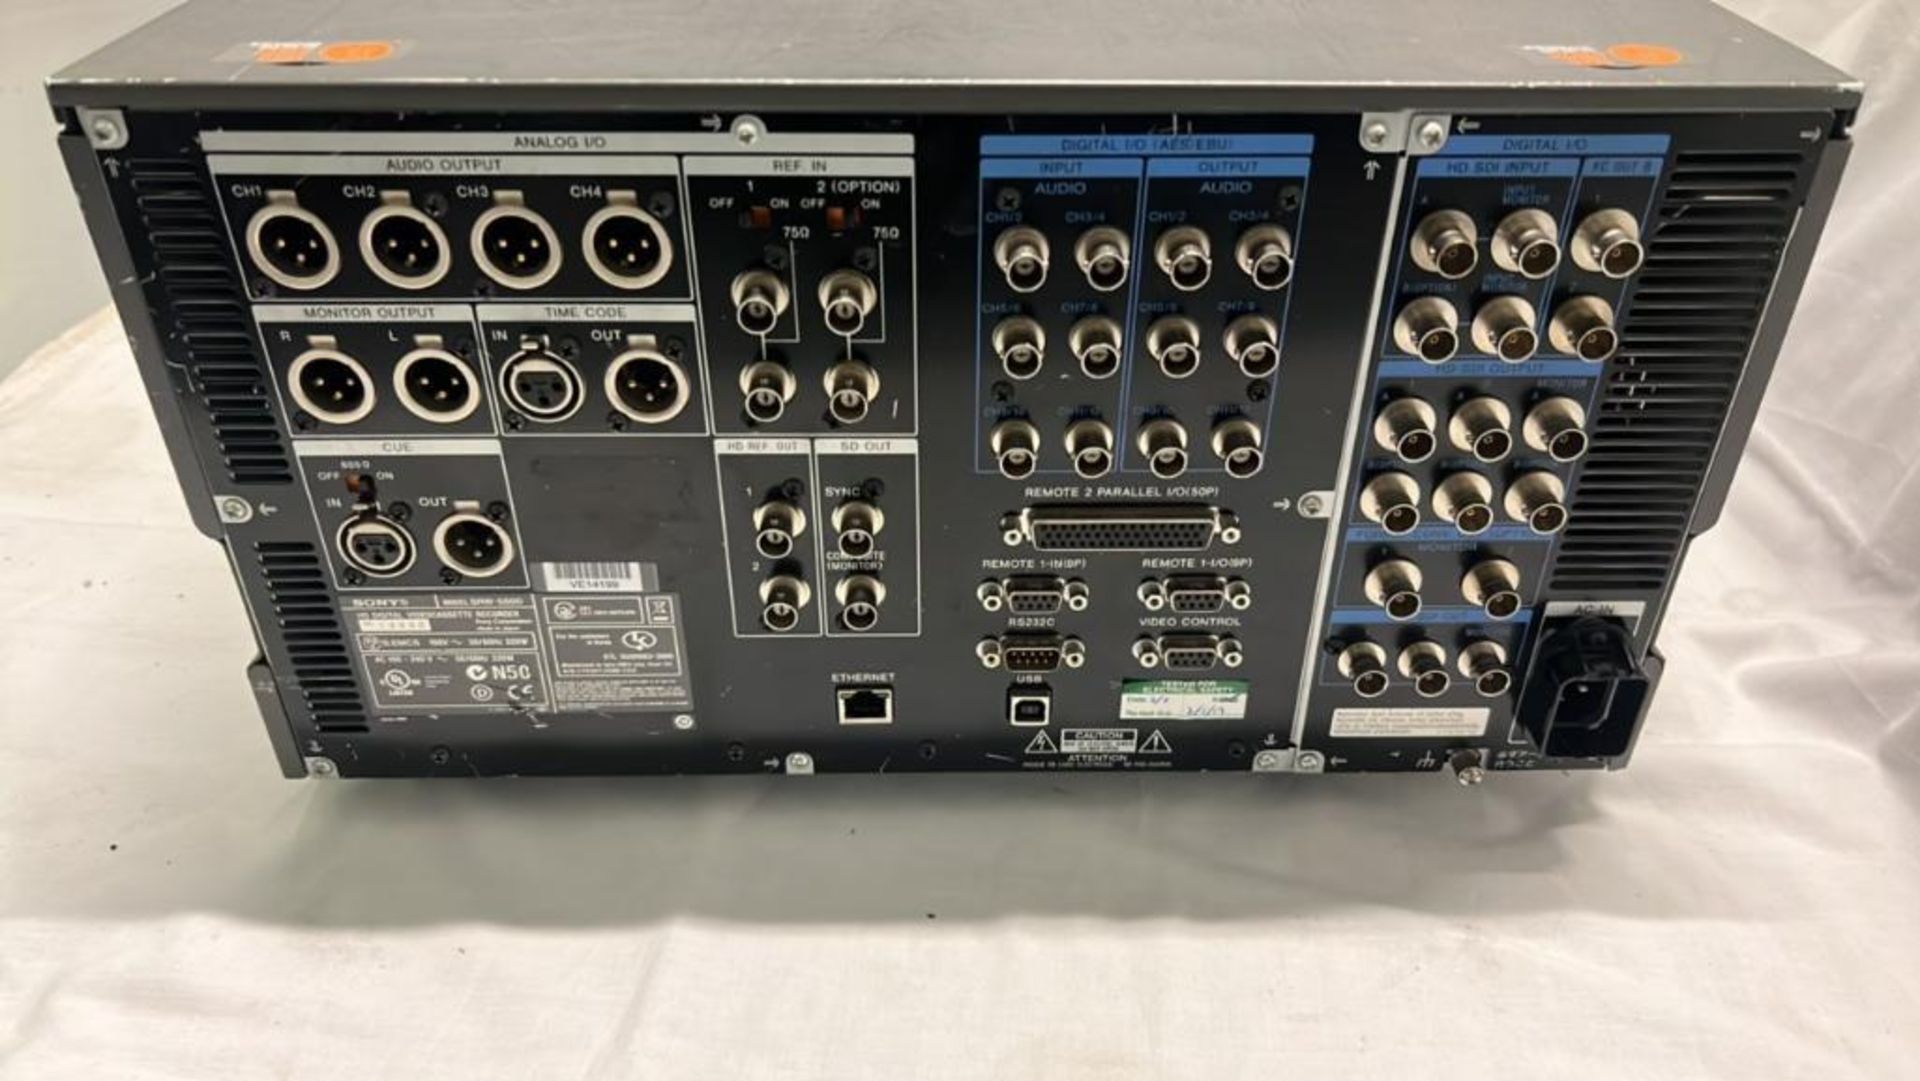 Sony SRW-5500 Digital Videocassette recorder with flight case SN :13930 - Image 4 of 6